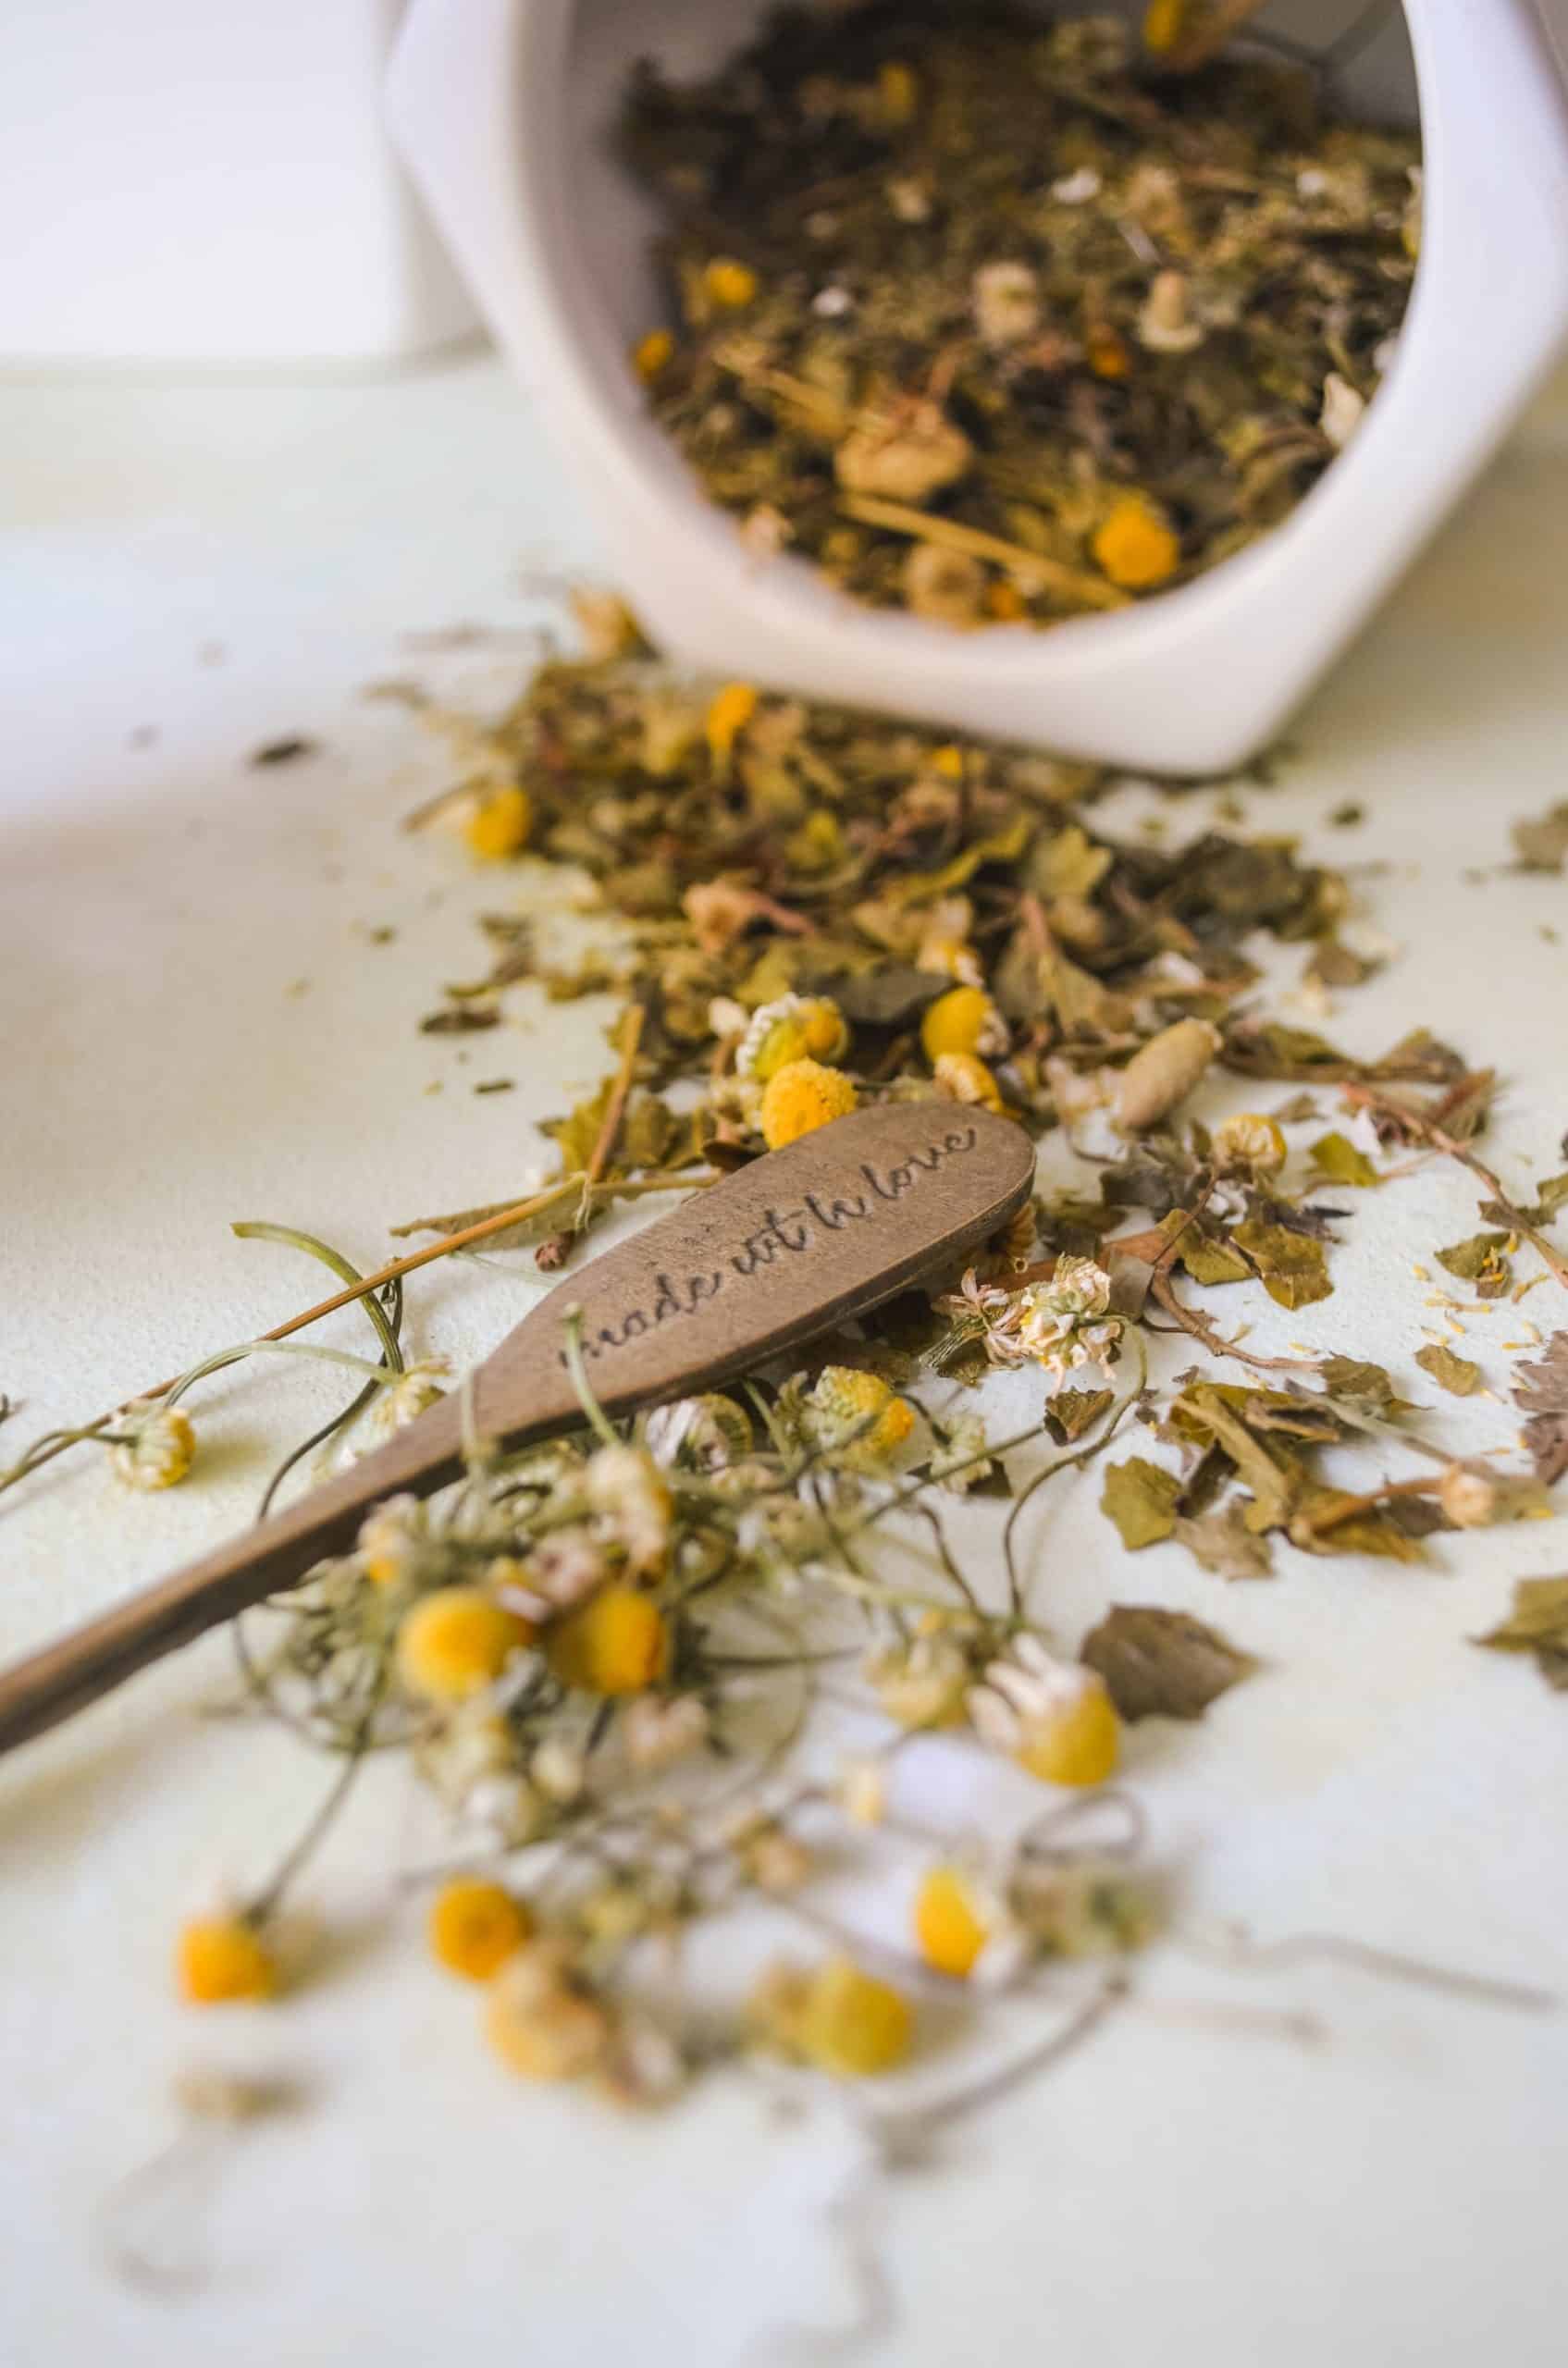 What properties does chamomile have?